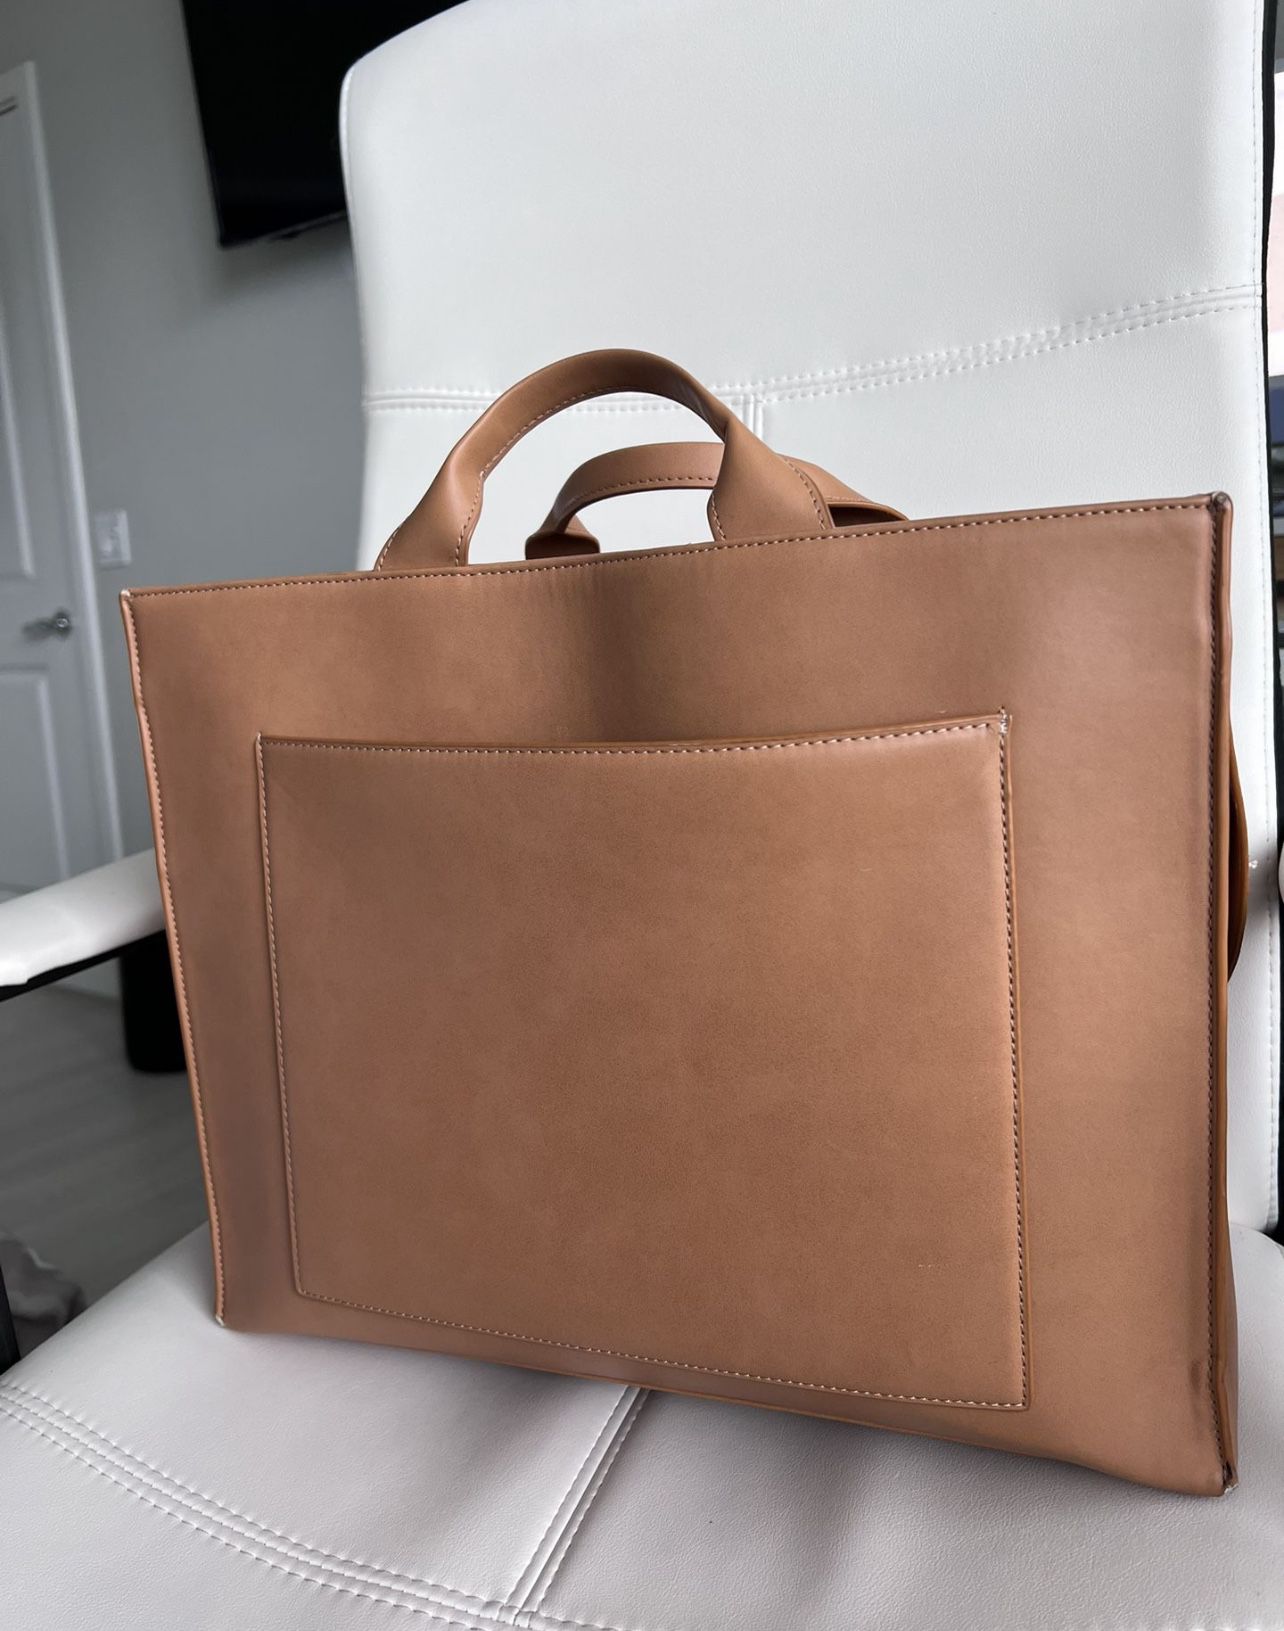 Dagne Dover on Instagram: The Daily Tote, 100% vegan and 100